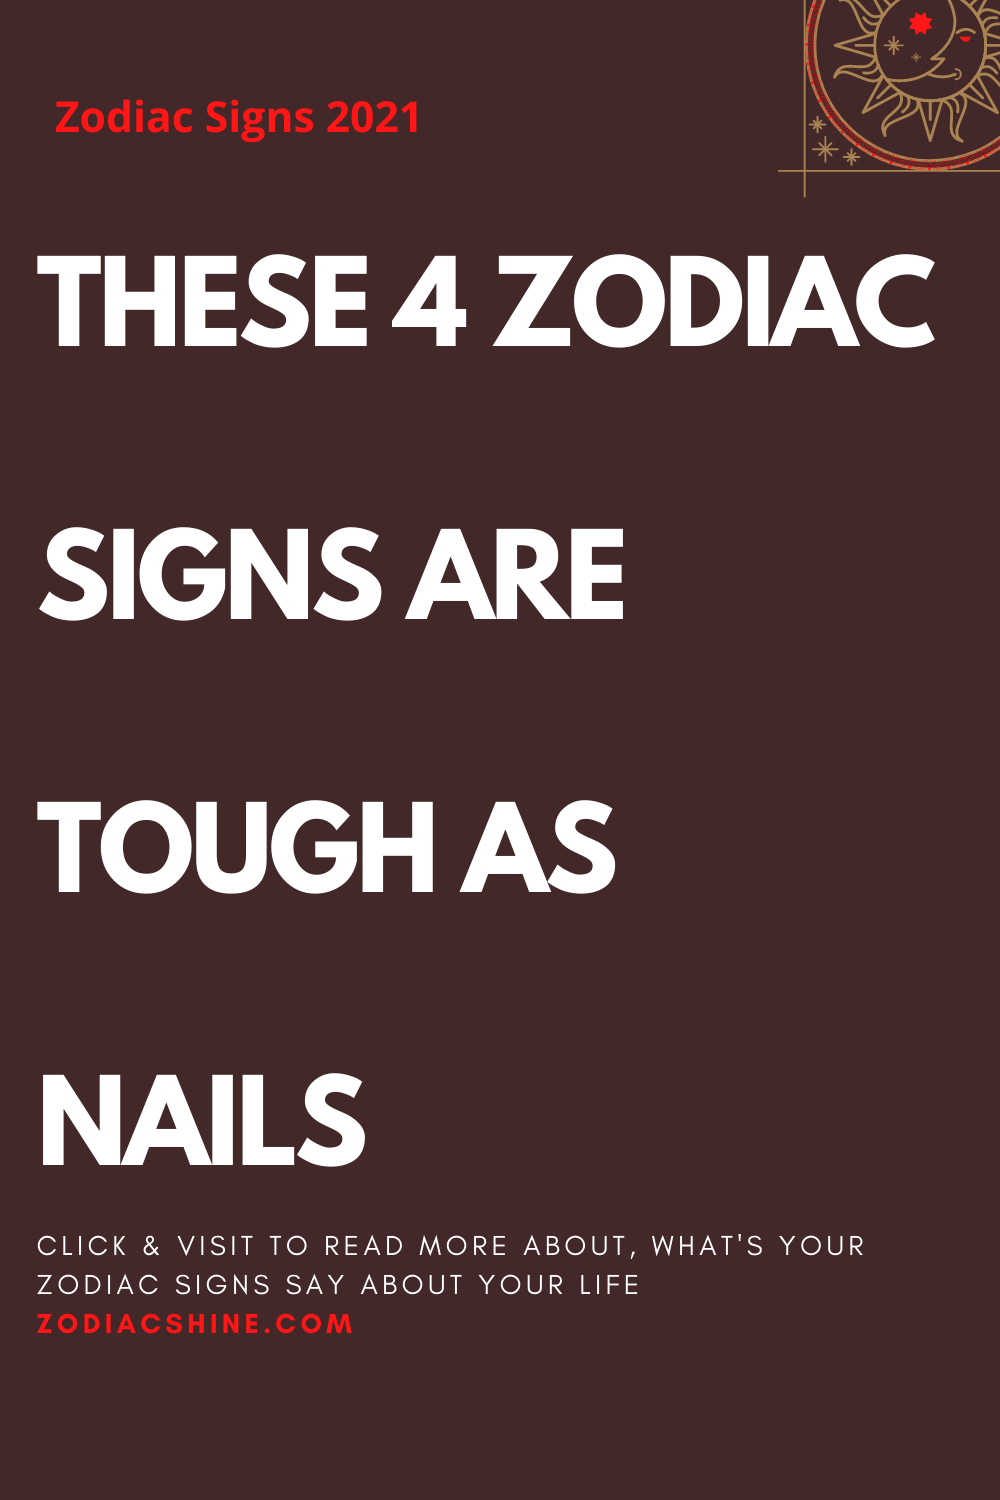 THESE 4 ZODIAC SIGNS ARE TOUGH AS NAILS